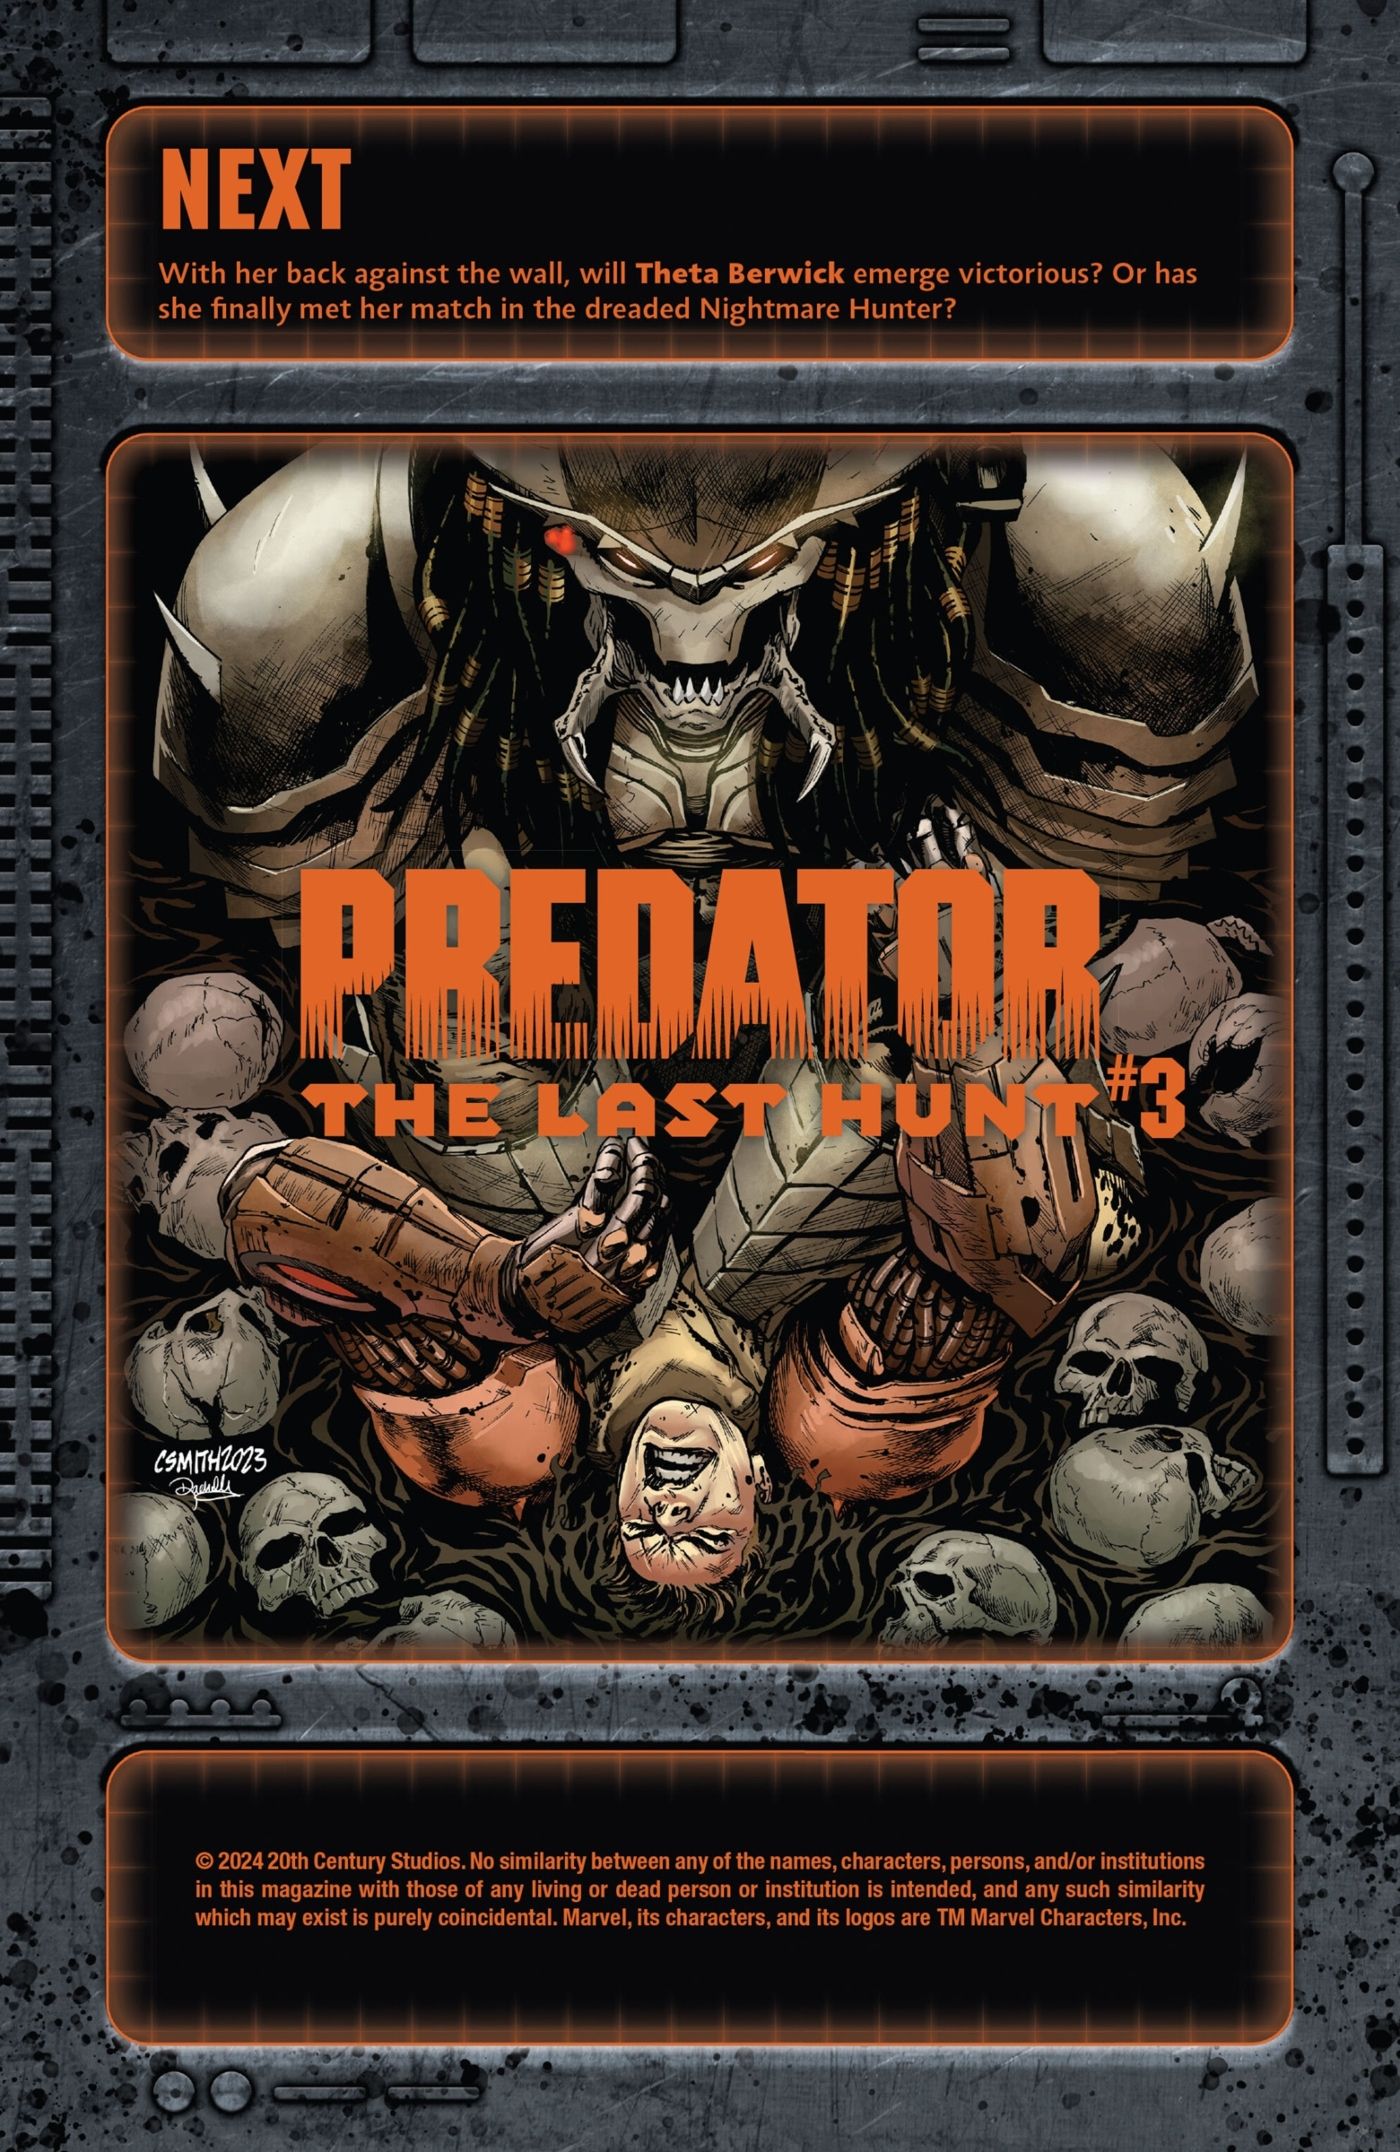 Preview for Predator: The Last Hunt #3 featuring Theta getting strangled by the Nightmare Hunter Predator.